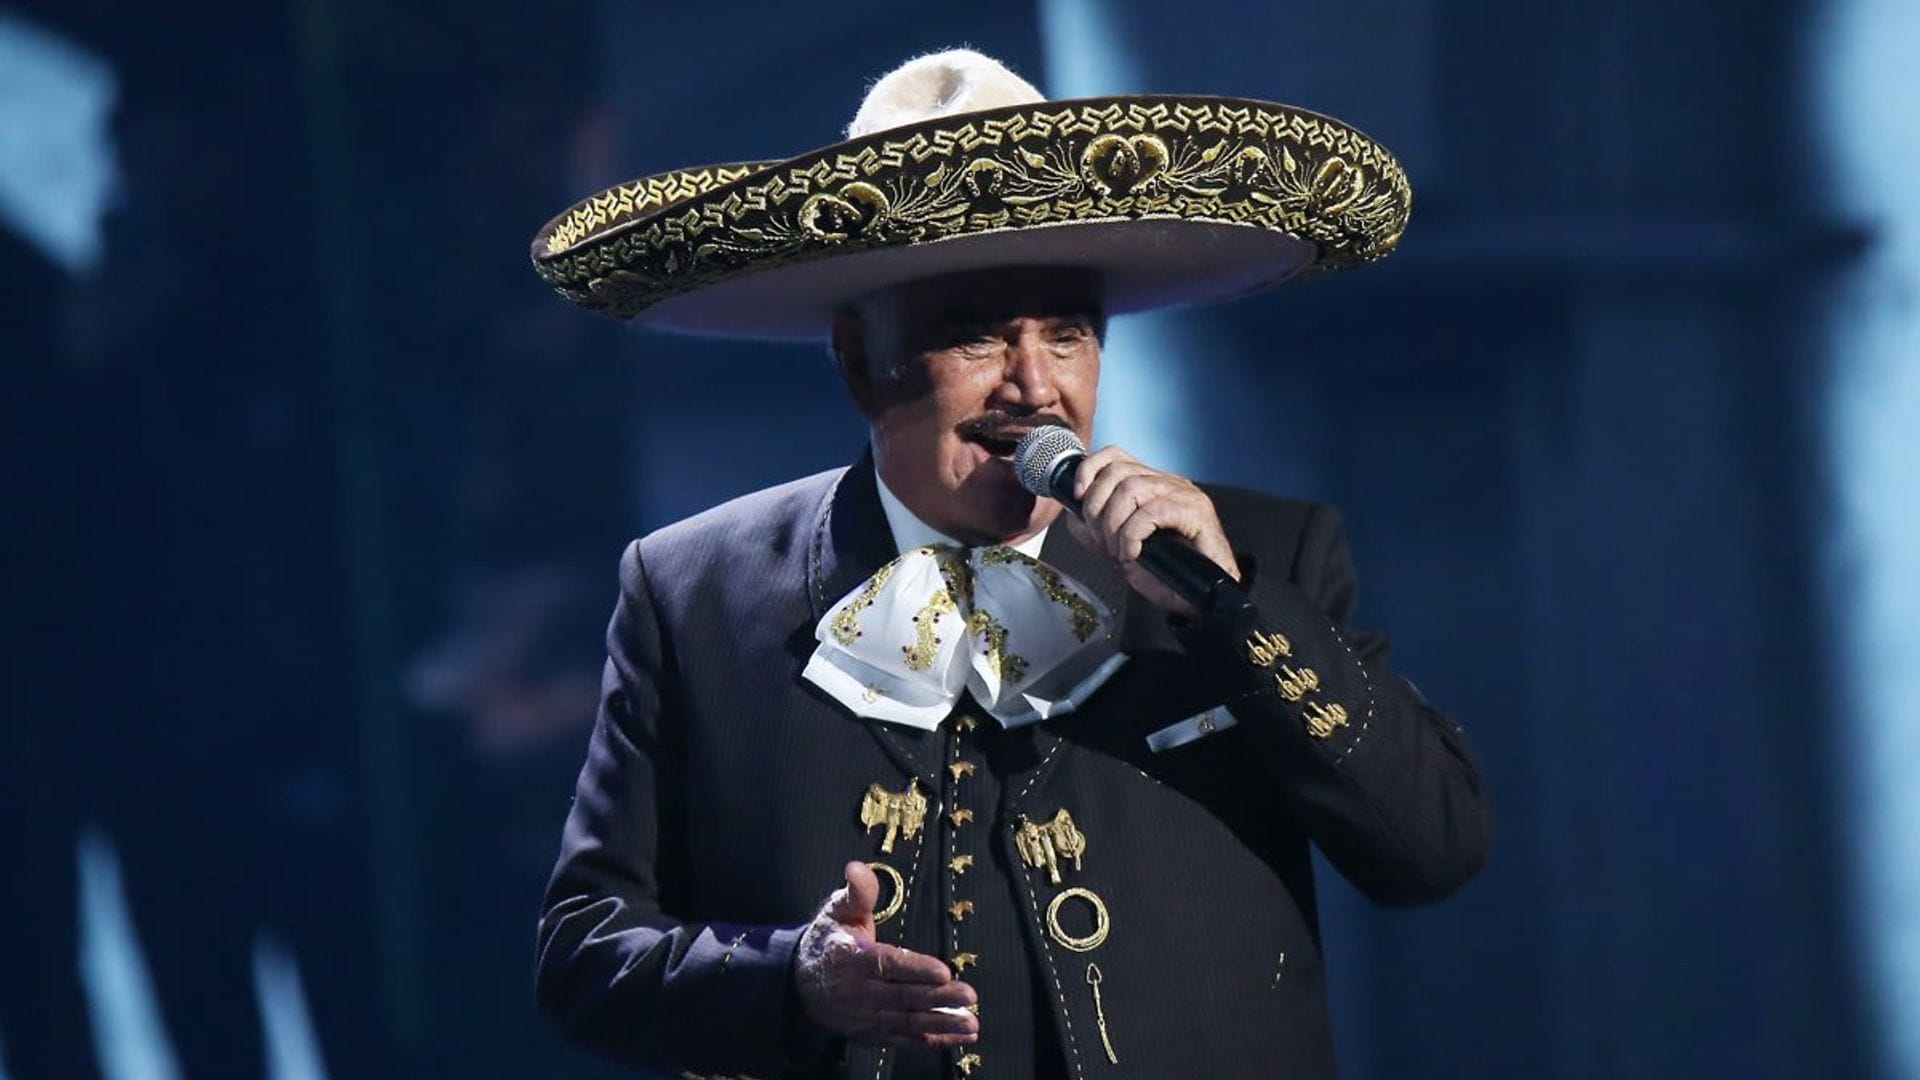 Vicente Fernández’s health is progressing slowly but he is interacting with family